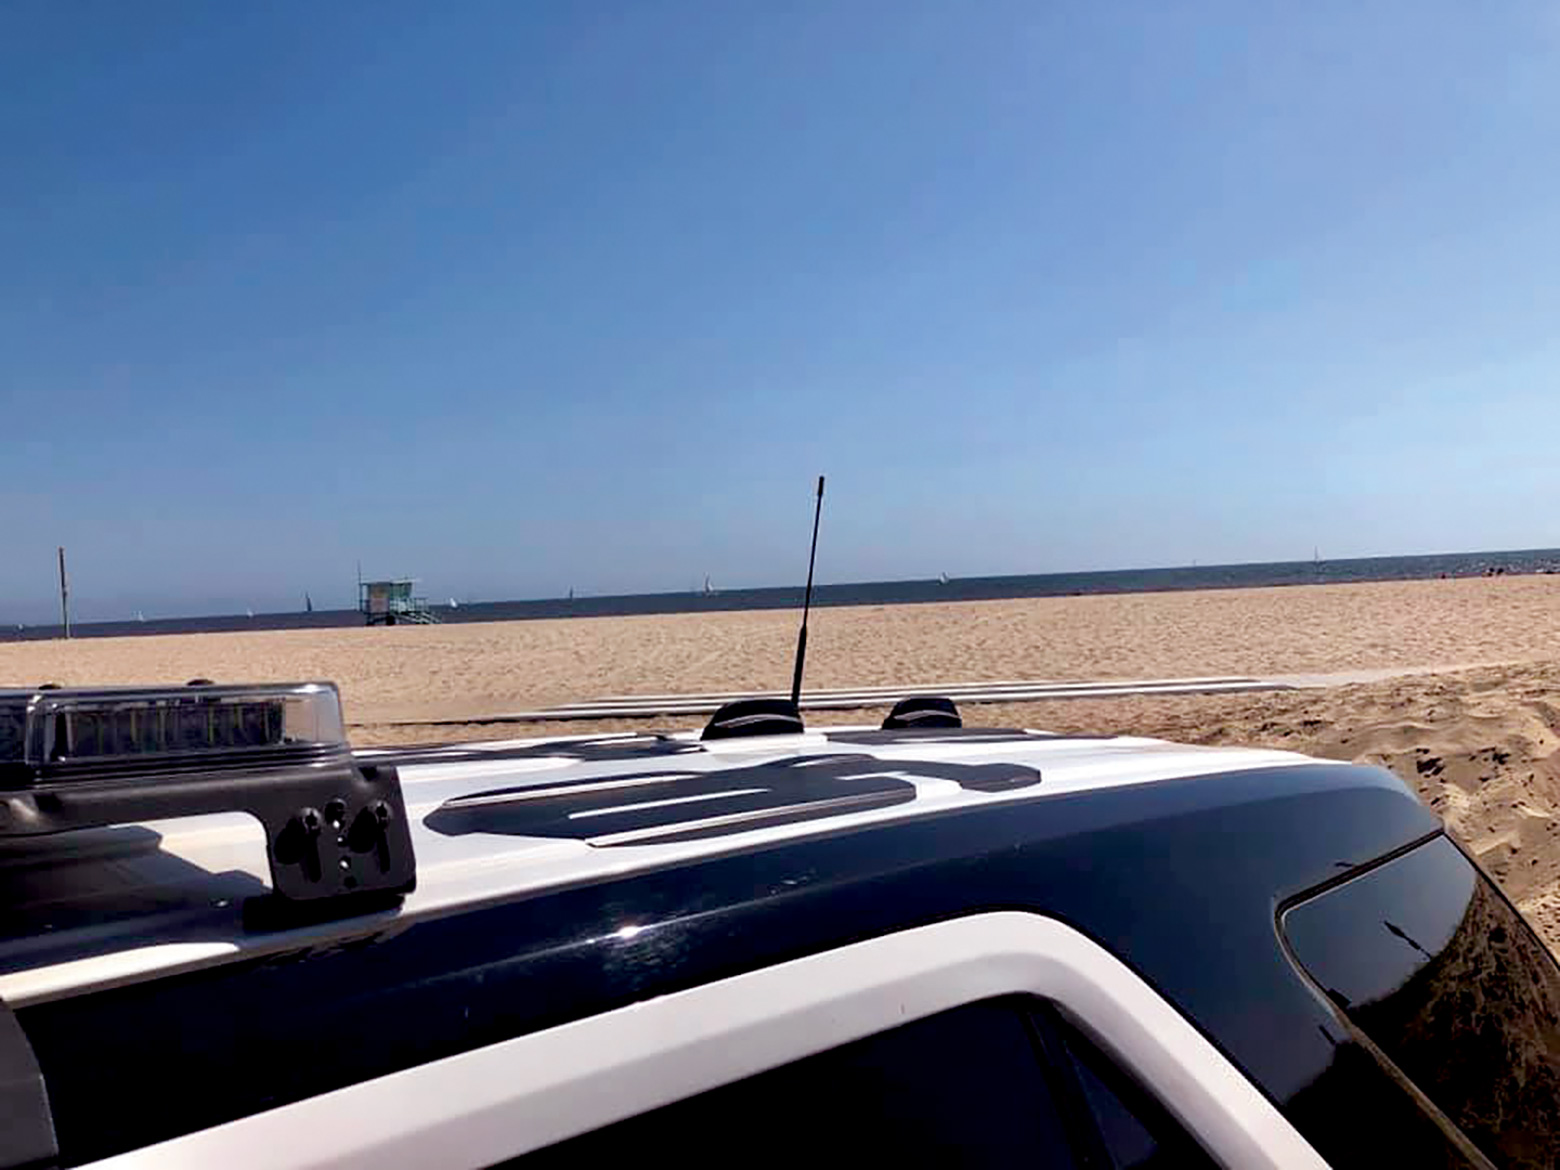 lapd-reserves-go-above-and-beyond-during-covid-19-35-venice-beach-detail